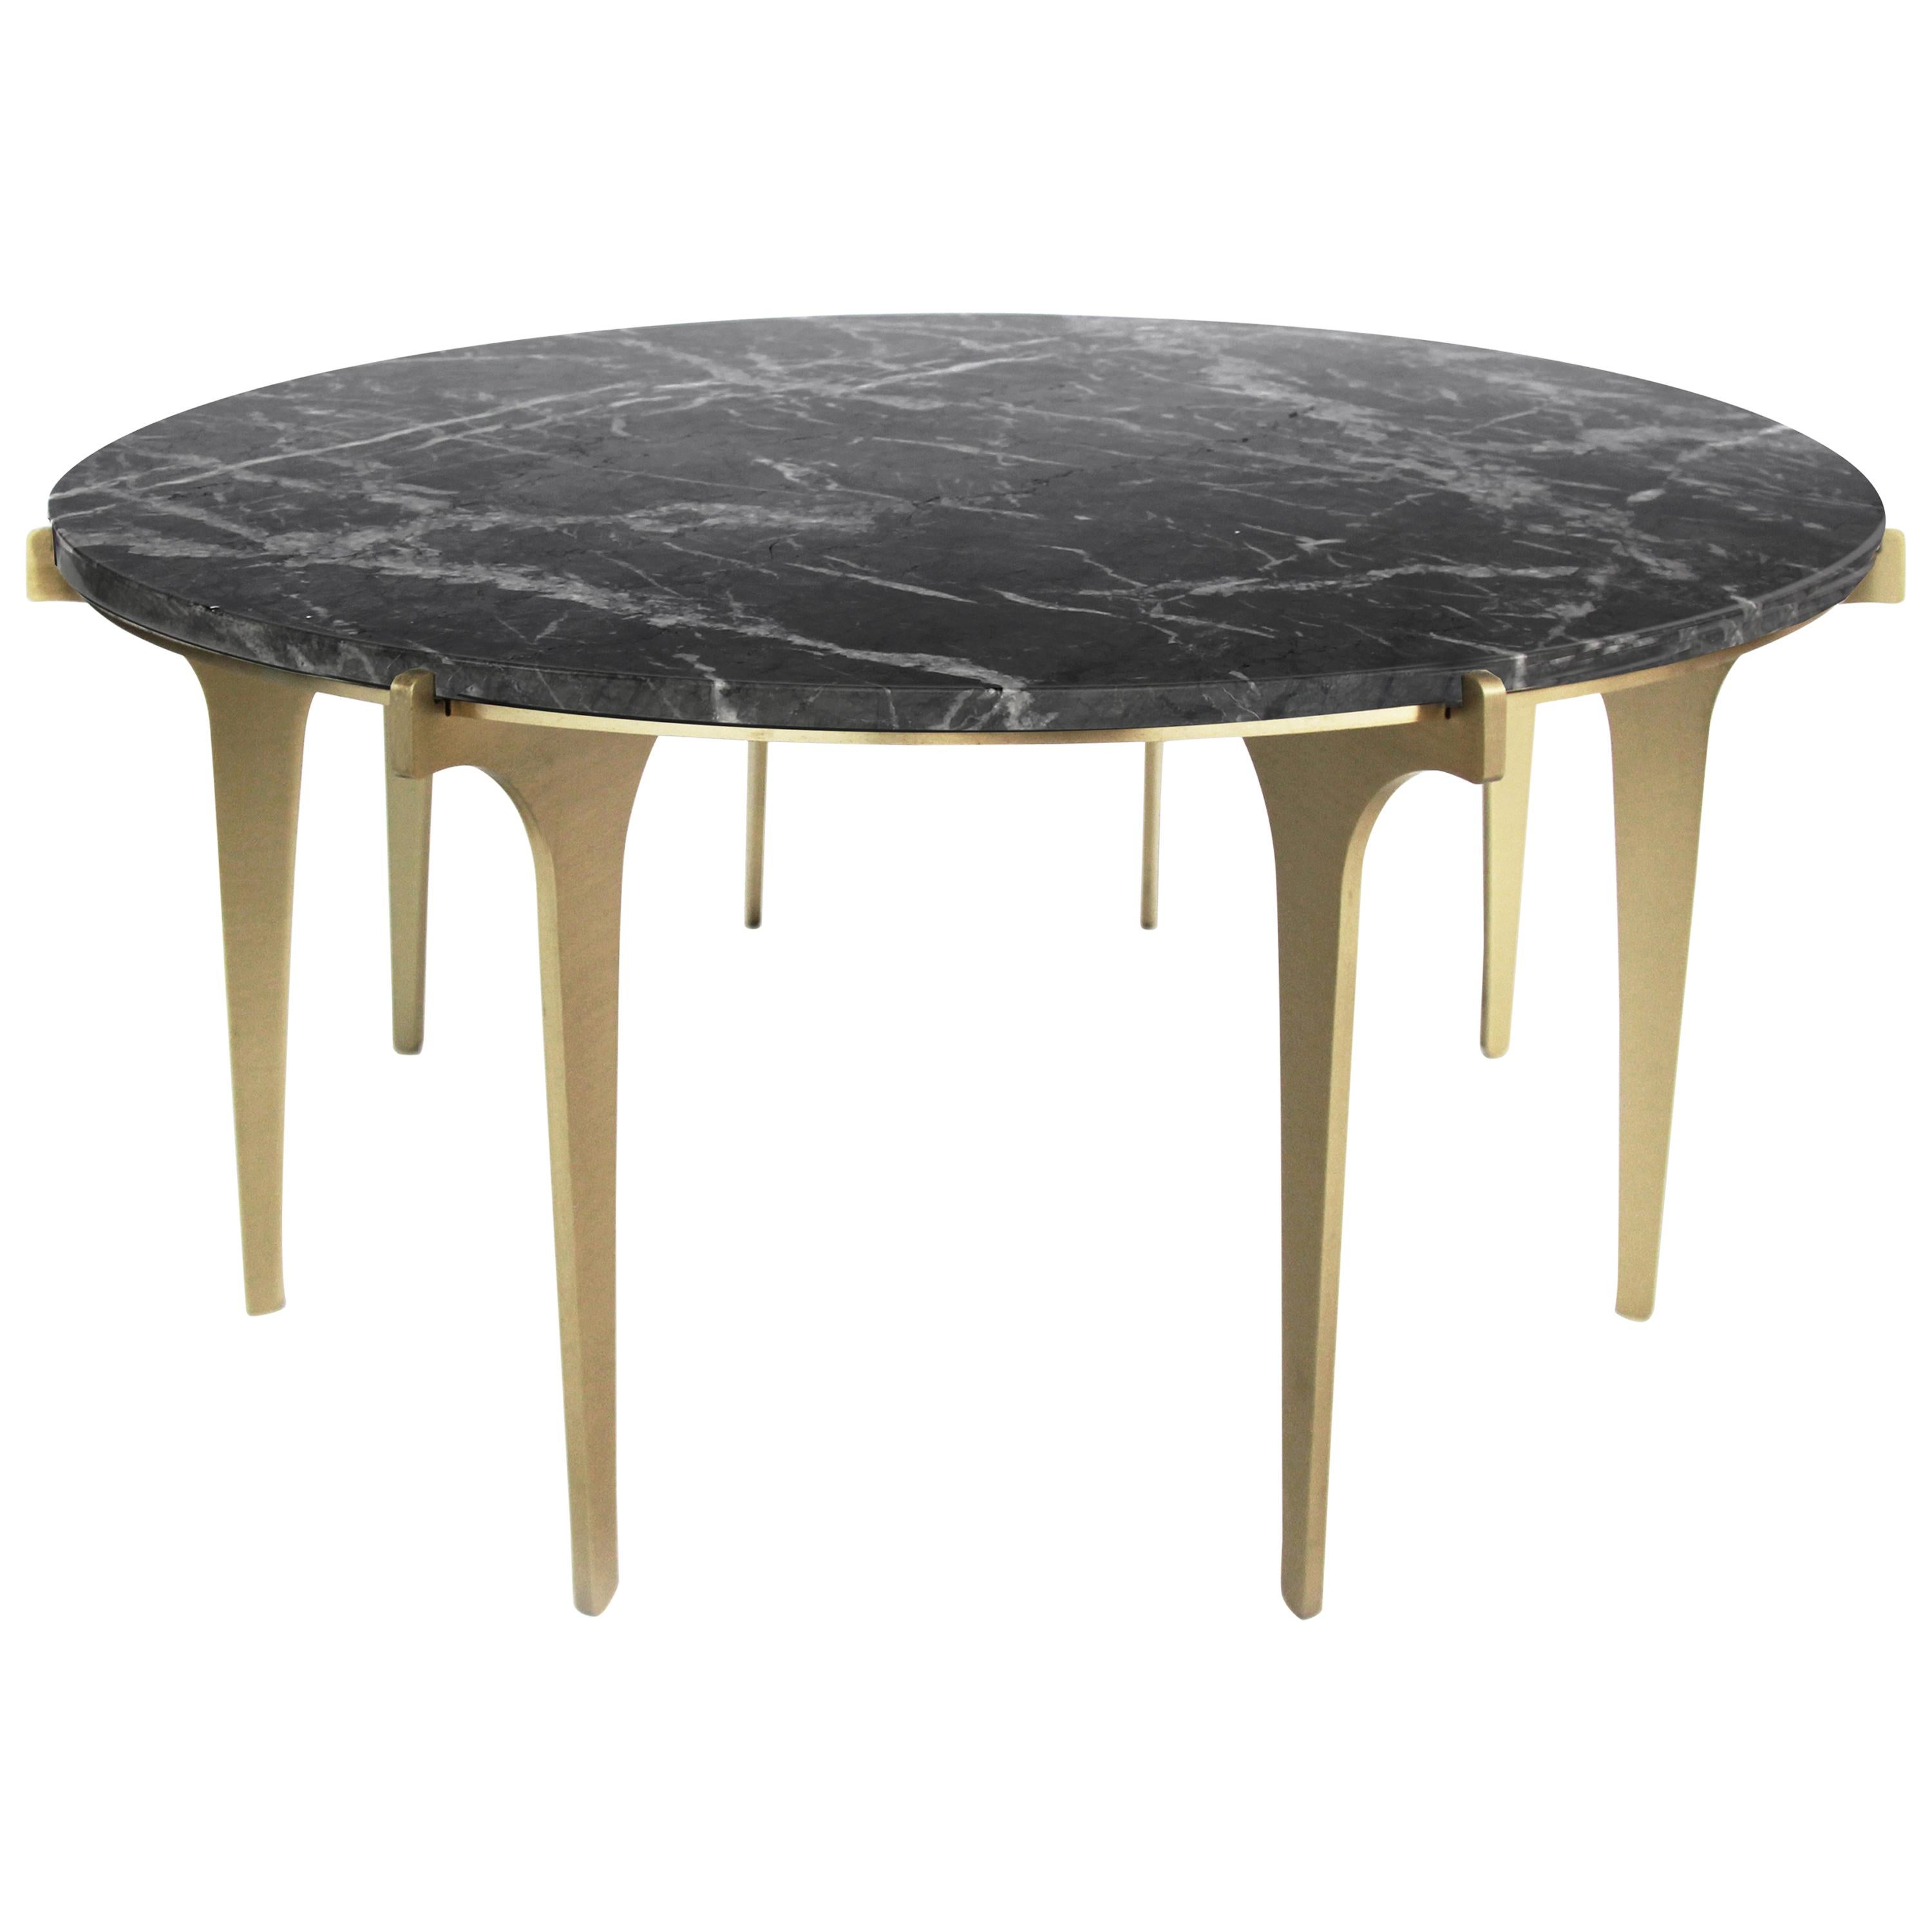 Black (Grigio Carnico - Black Stone) Prong Round Coffee Table in Satin Brass Base with Marble Top by Gabriel Scott